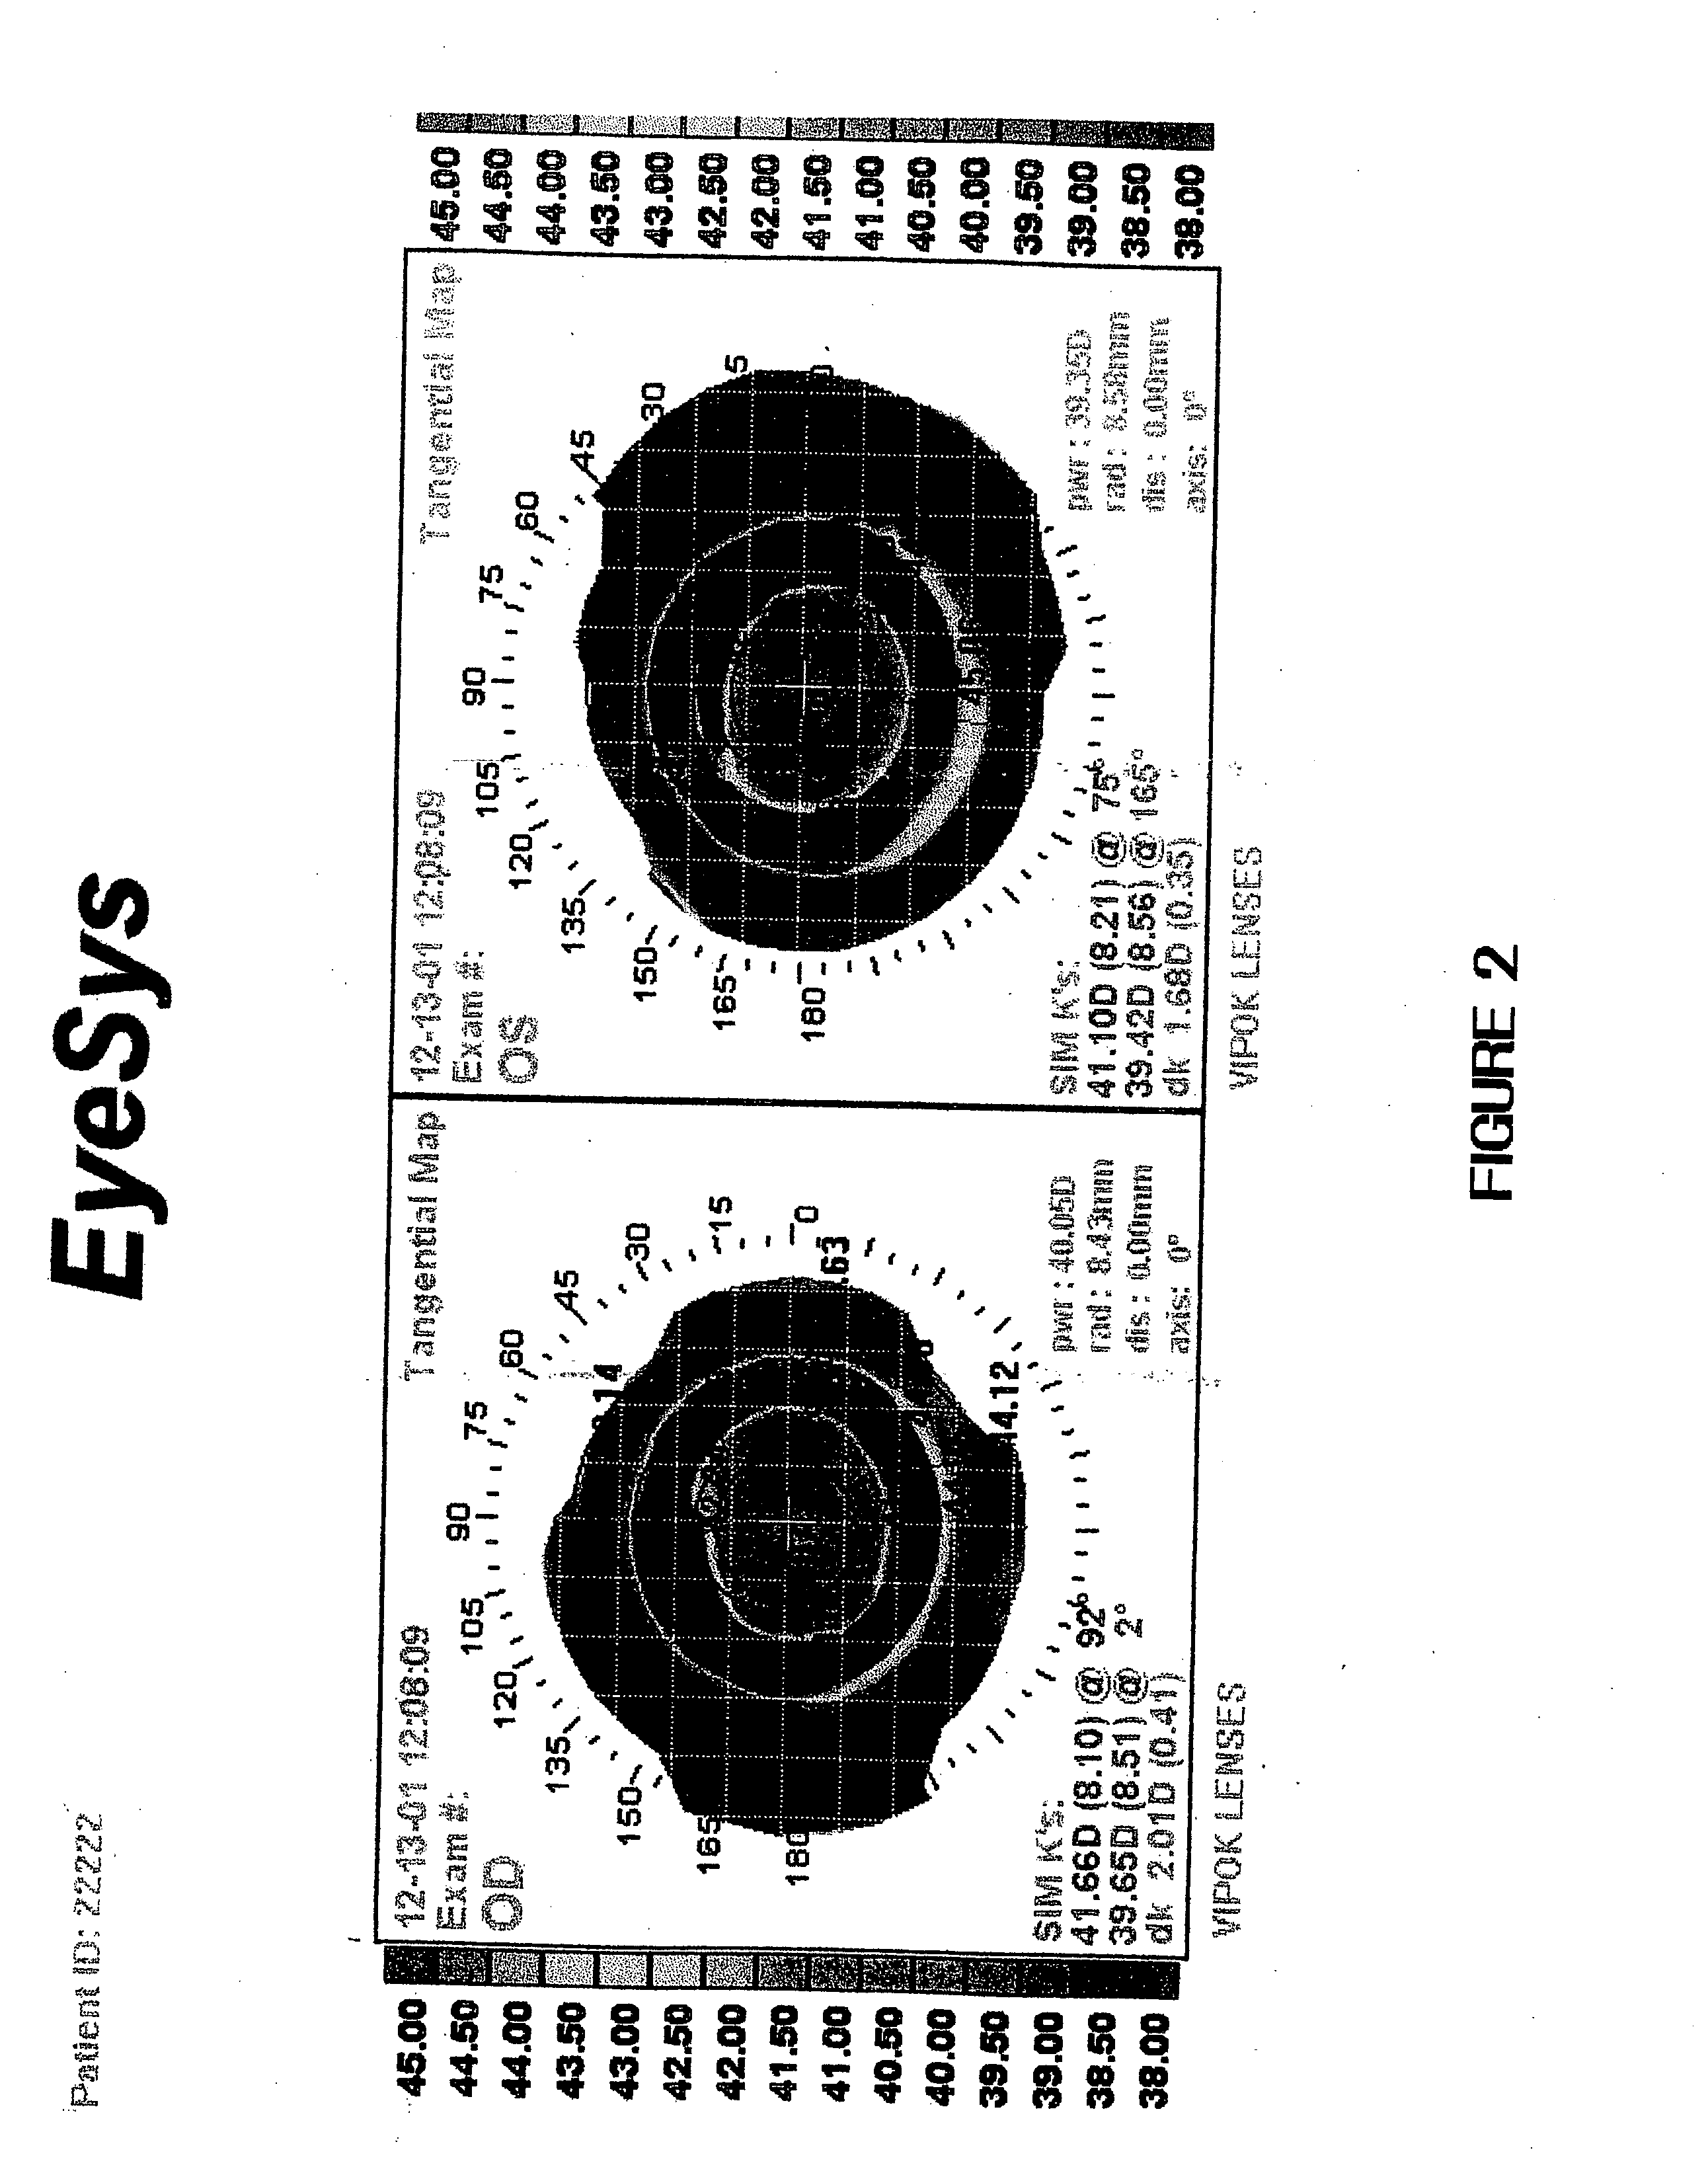 Method for stabilizing changes in corneal curvature in an eye by administering compositions containing stabilizing ophthalmic agents